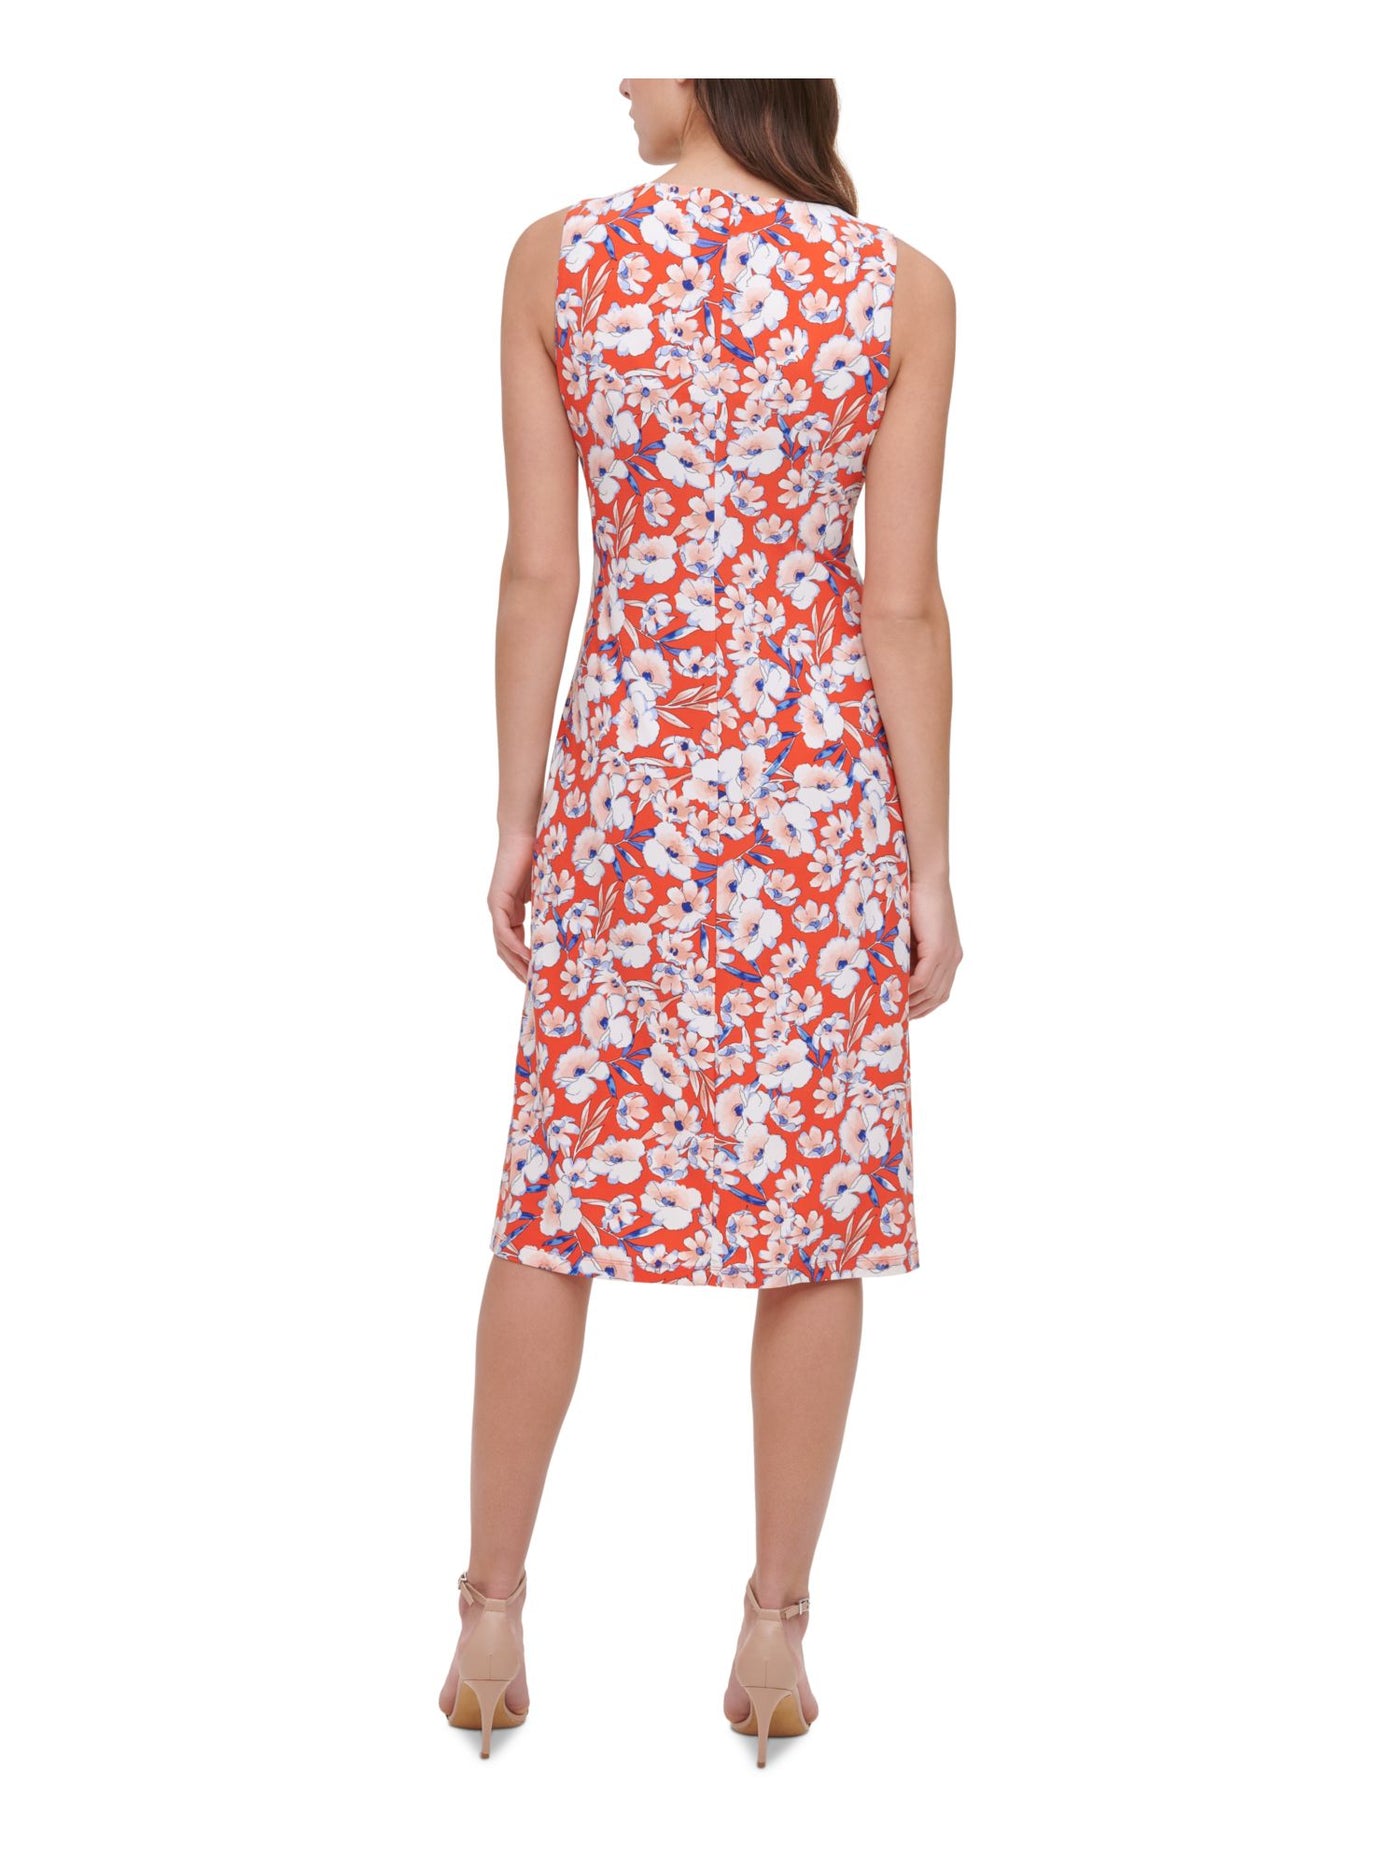 TOMMY HILFIGER Womens Orange Stretch Floral Sleeveless Crew Neck Knee Length Party Shift Dress 16